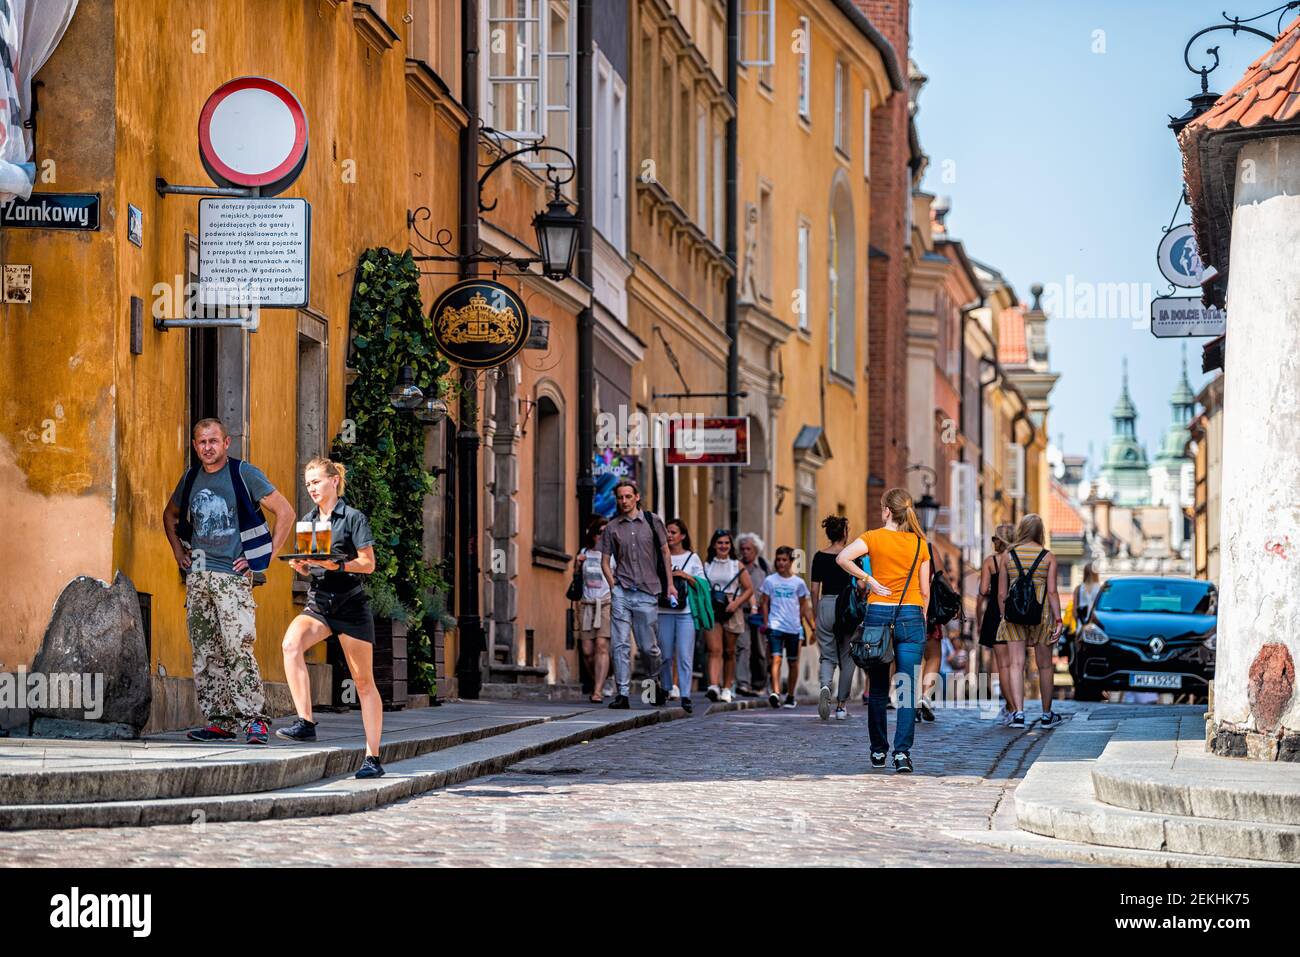 Warsaw, Poland - August 23, 2018: Old town historic city during summer day with cobbled cobblestone narrow back street alley ul Piwna and stores shops Stock Photo